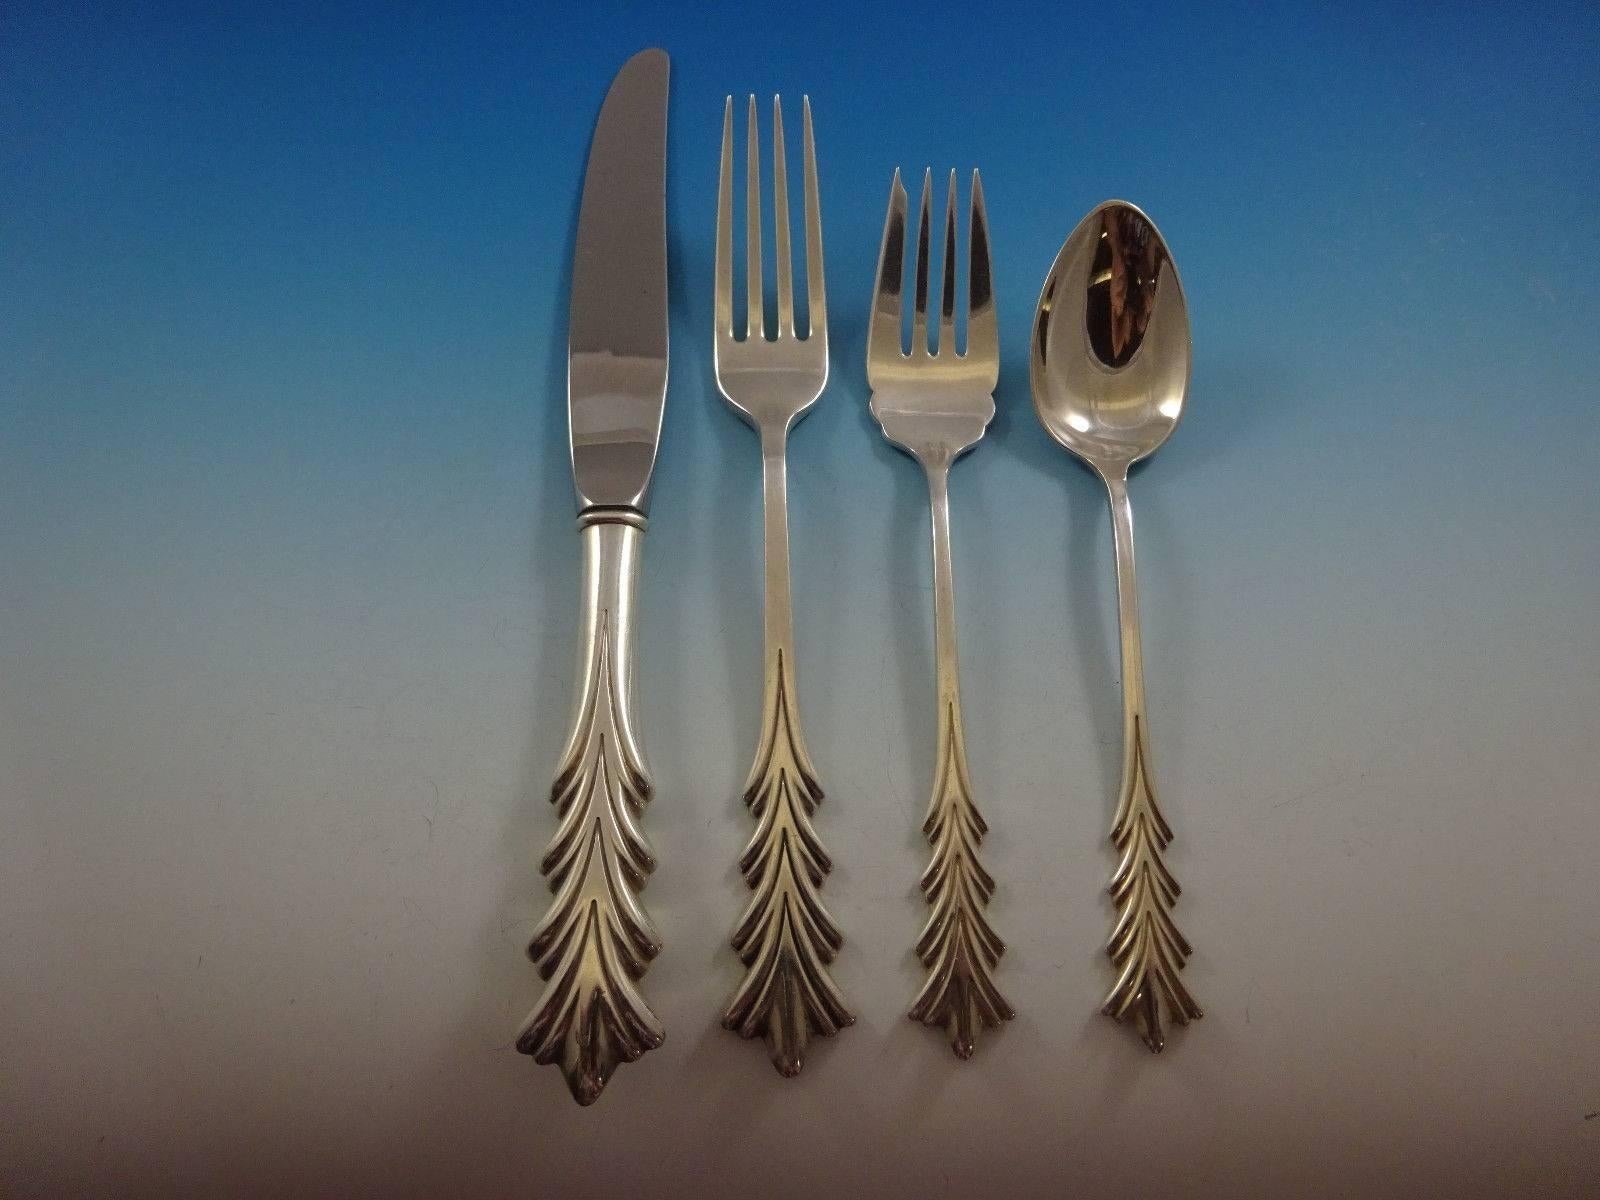 Beautiful crest of Arden sterling silver flatware set of 66 pieces. This set includes:
 
12 Knives, 8 3/4